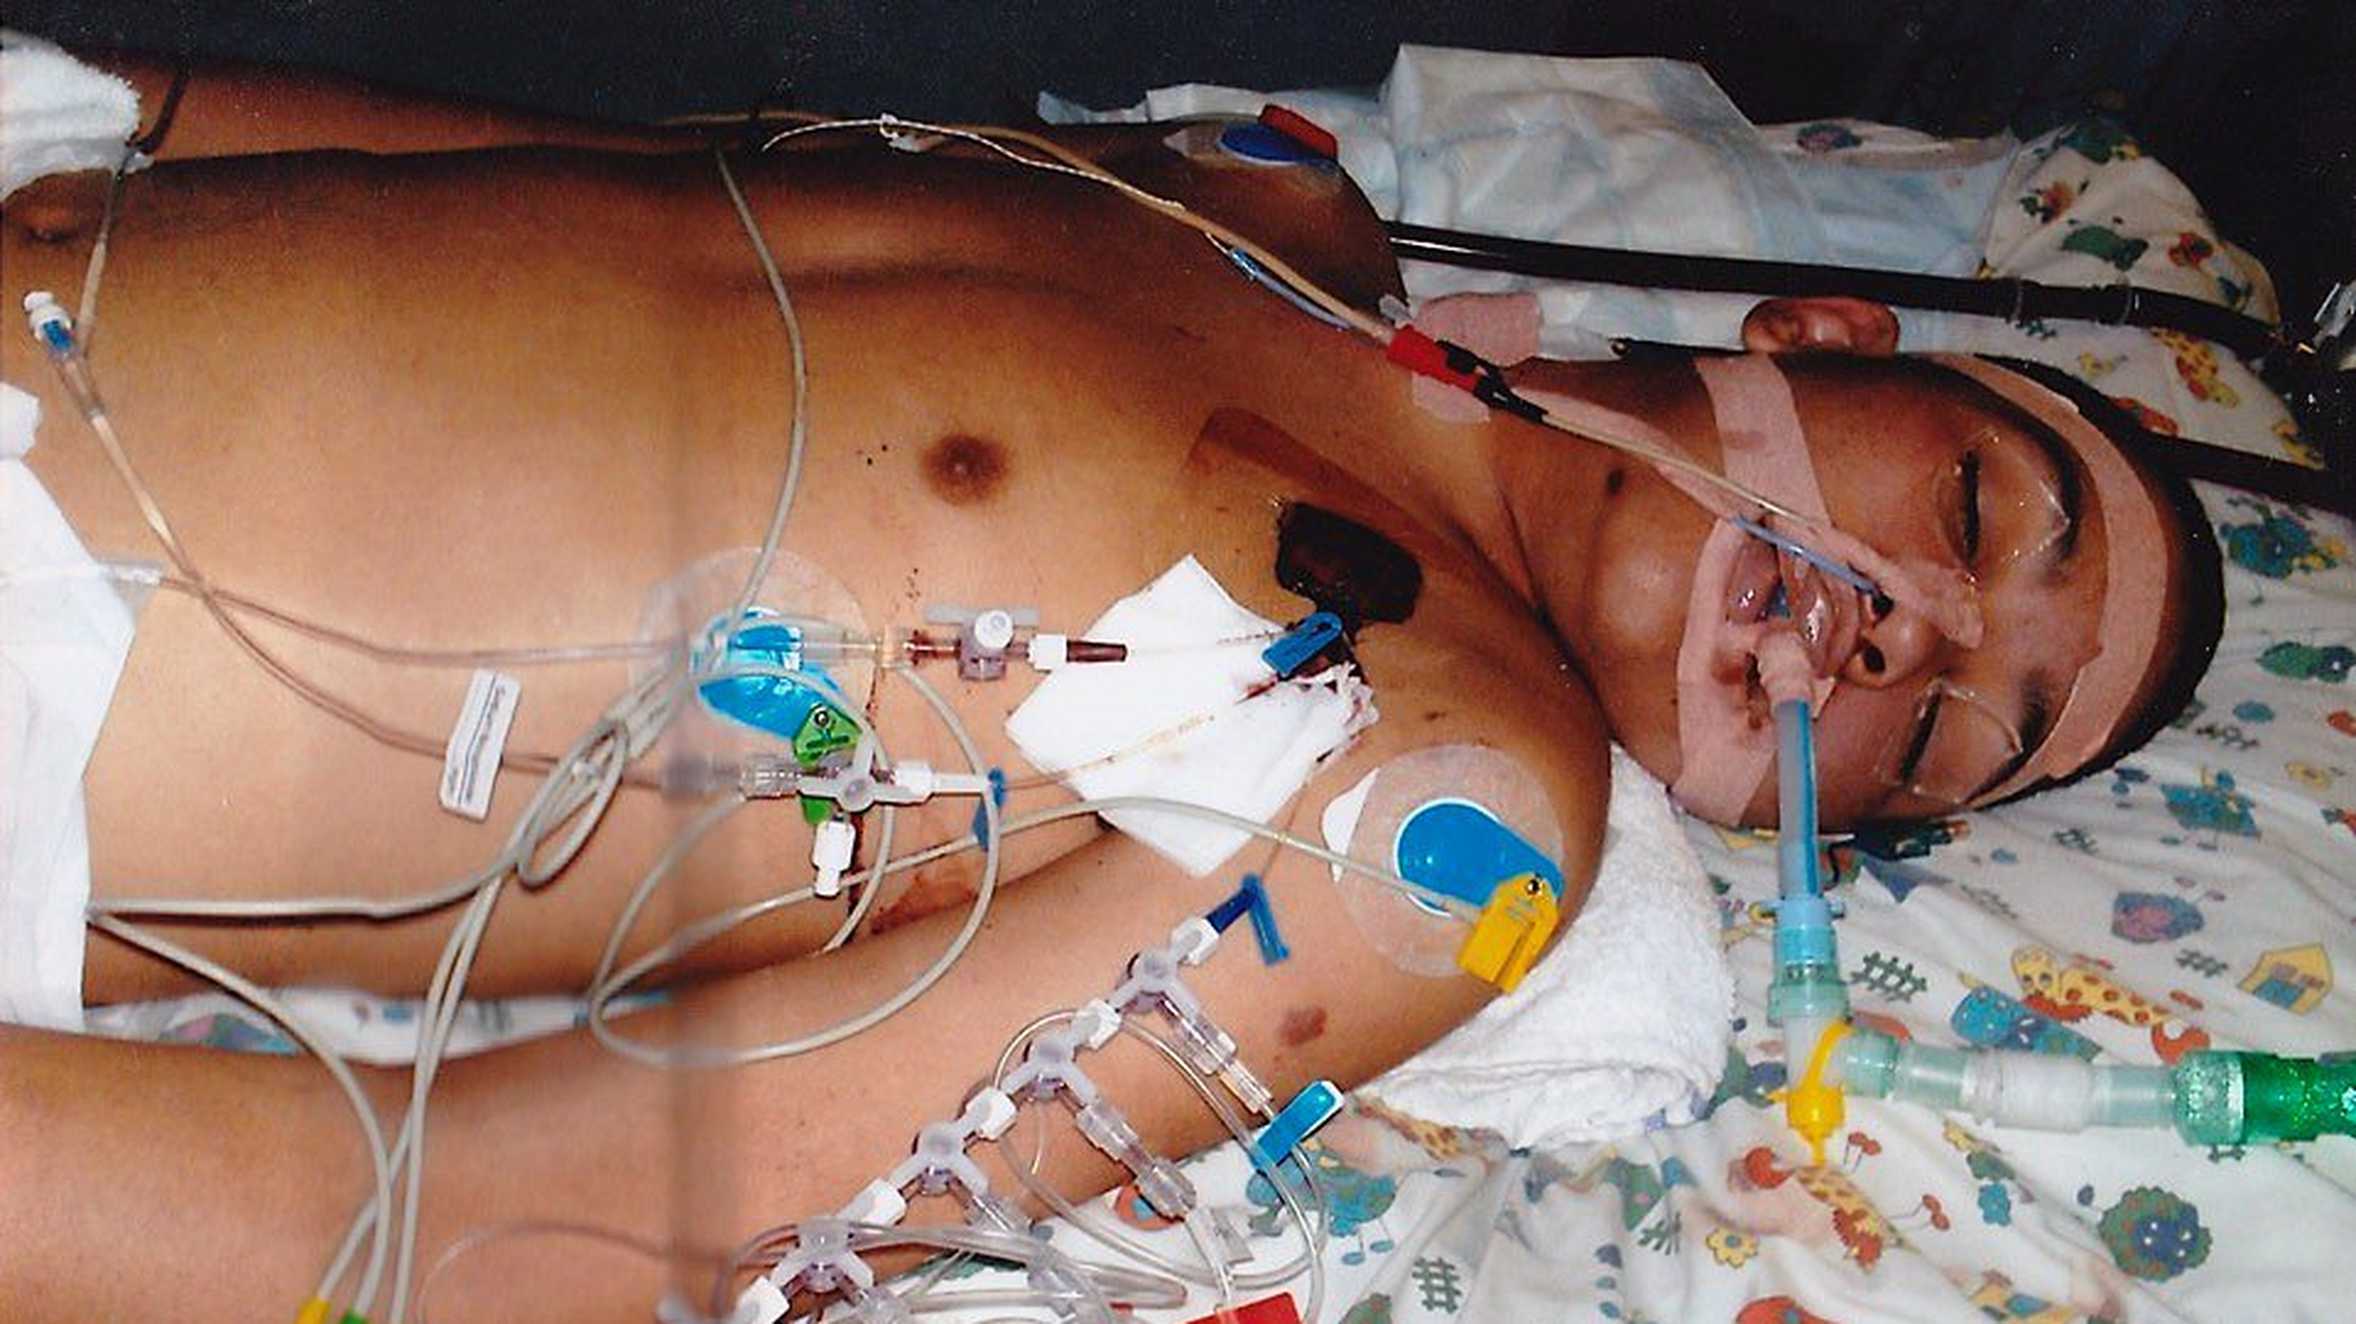 Anthony on a ventilator in his hospital bed, during treatment for his illness.